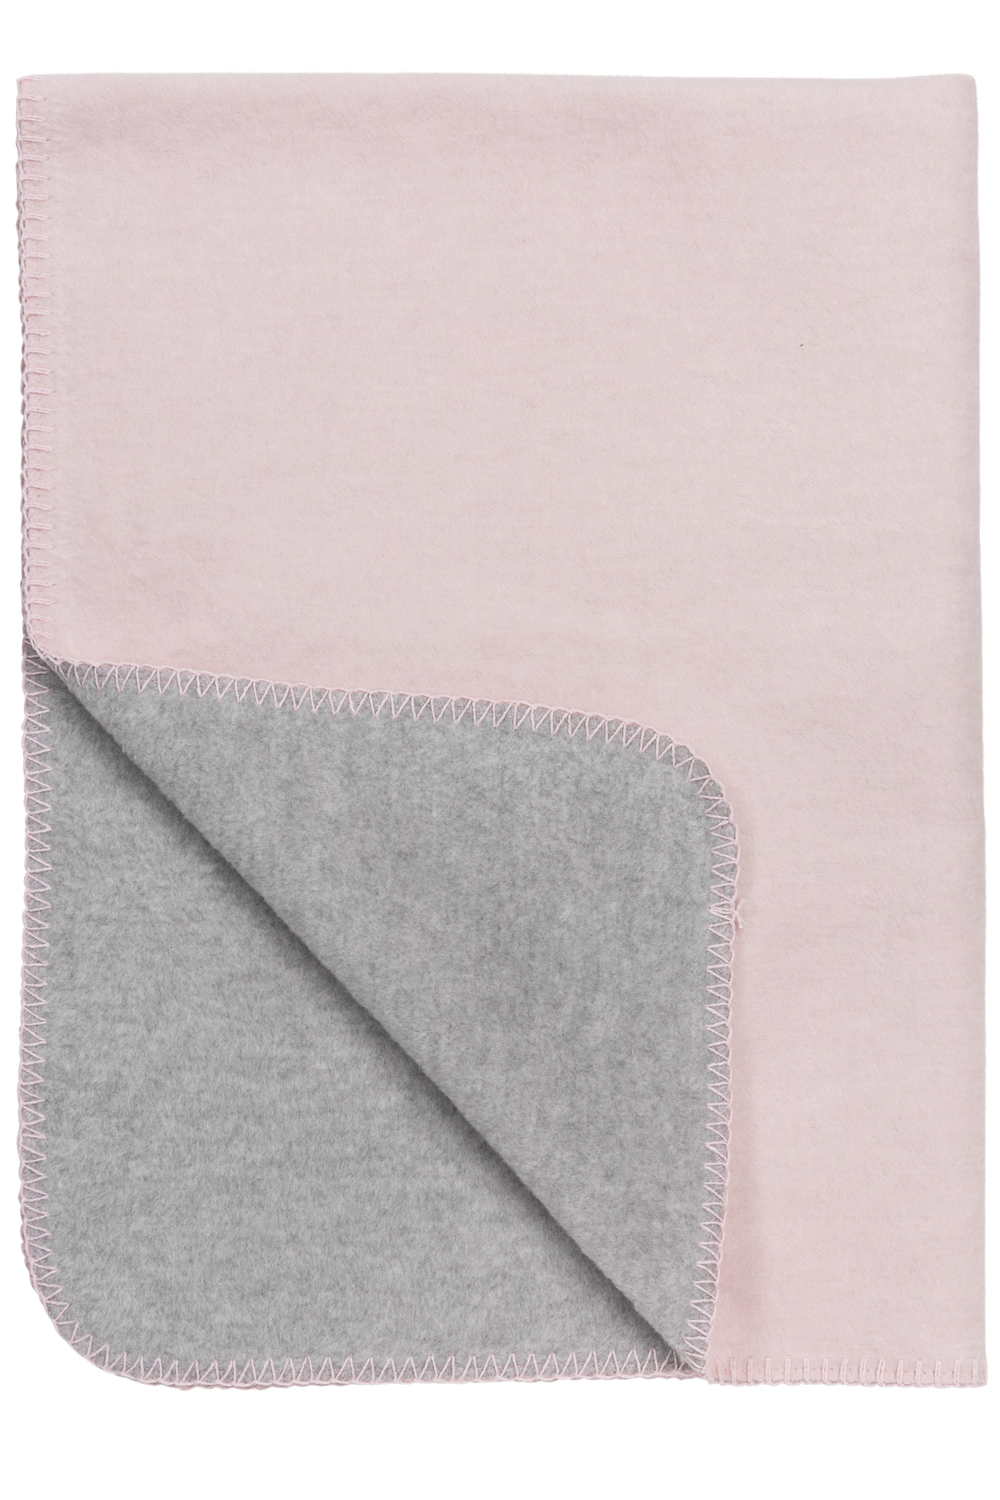 Crib Blanket Double Face - Pink/Grey - 75X100cm